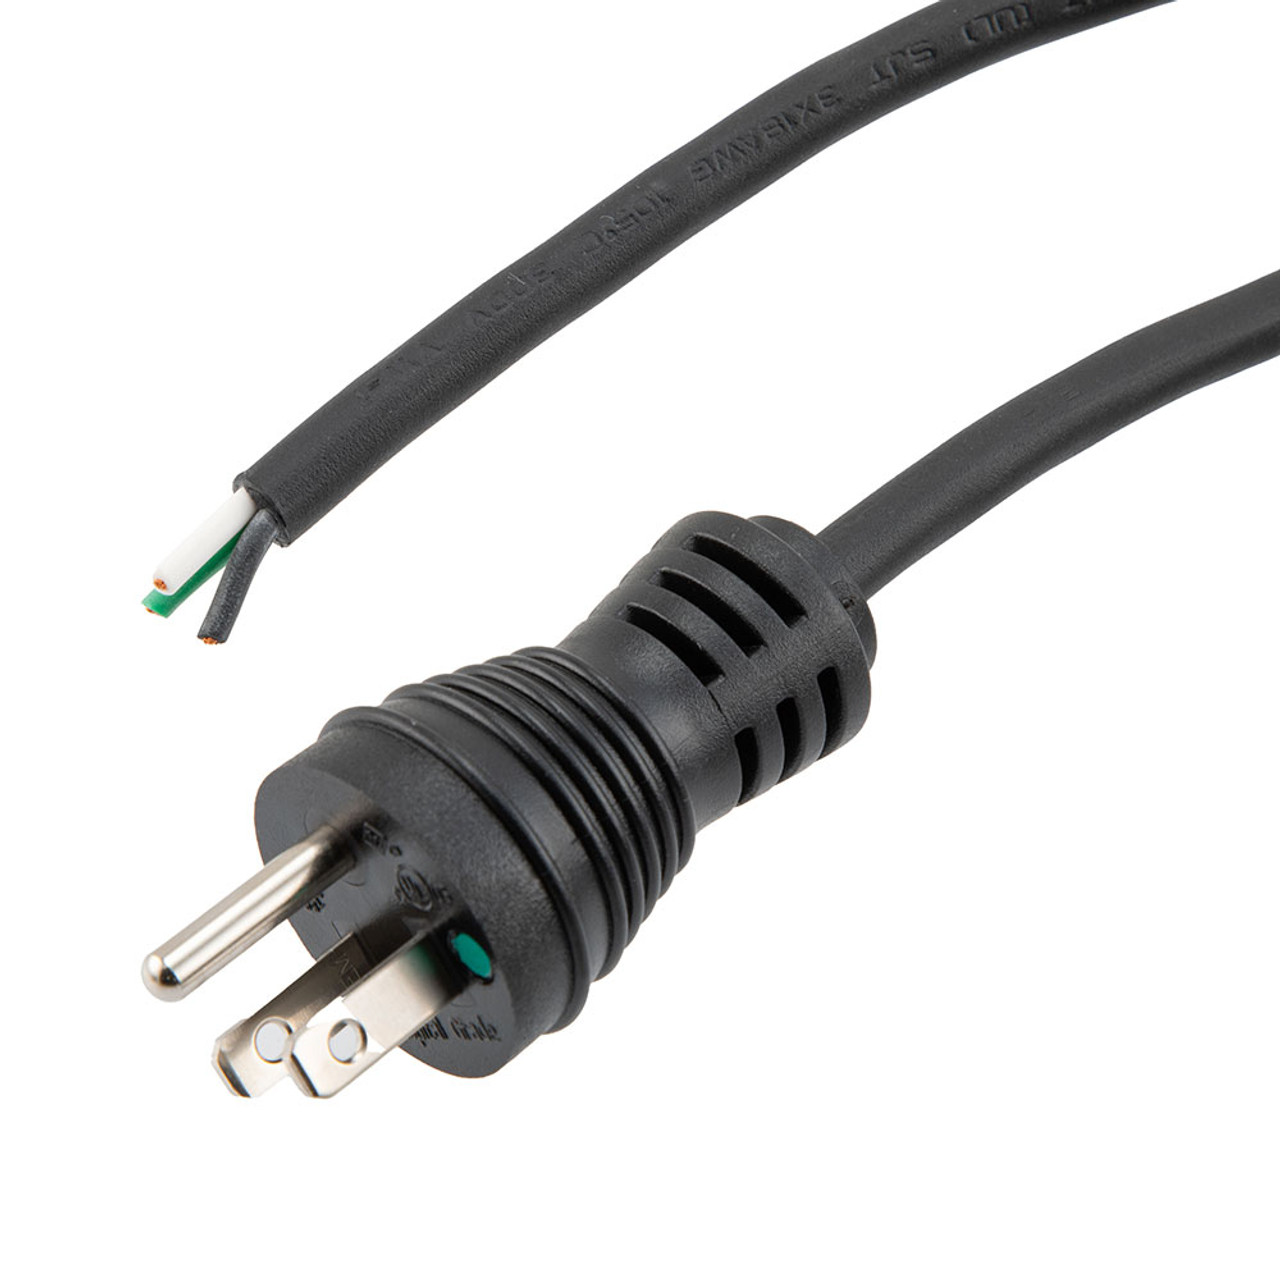 Hospital Grade NEMA 5-15 to Open Coiled Power Cord 18 AWG TPE Jacket, 2 Foot Compressed Length